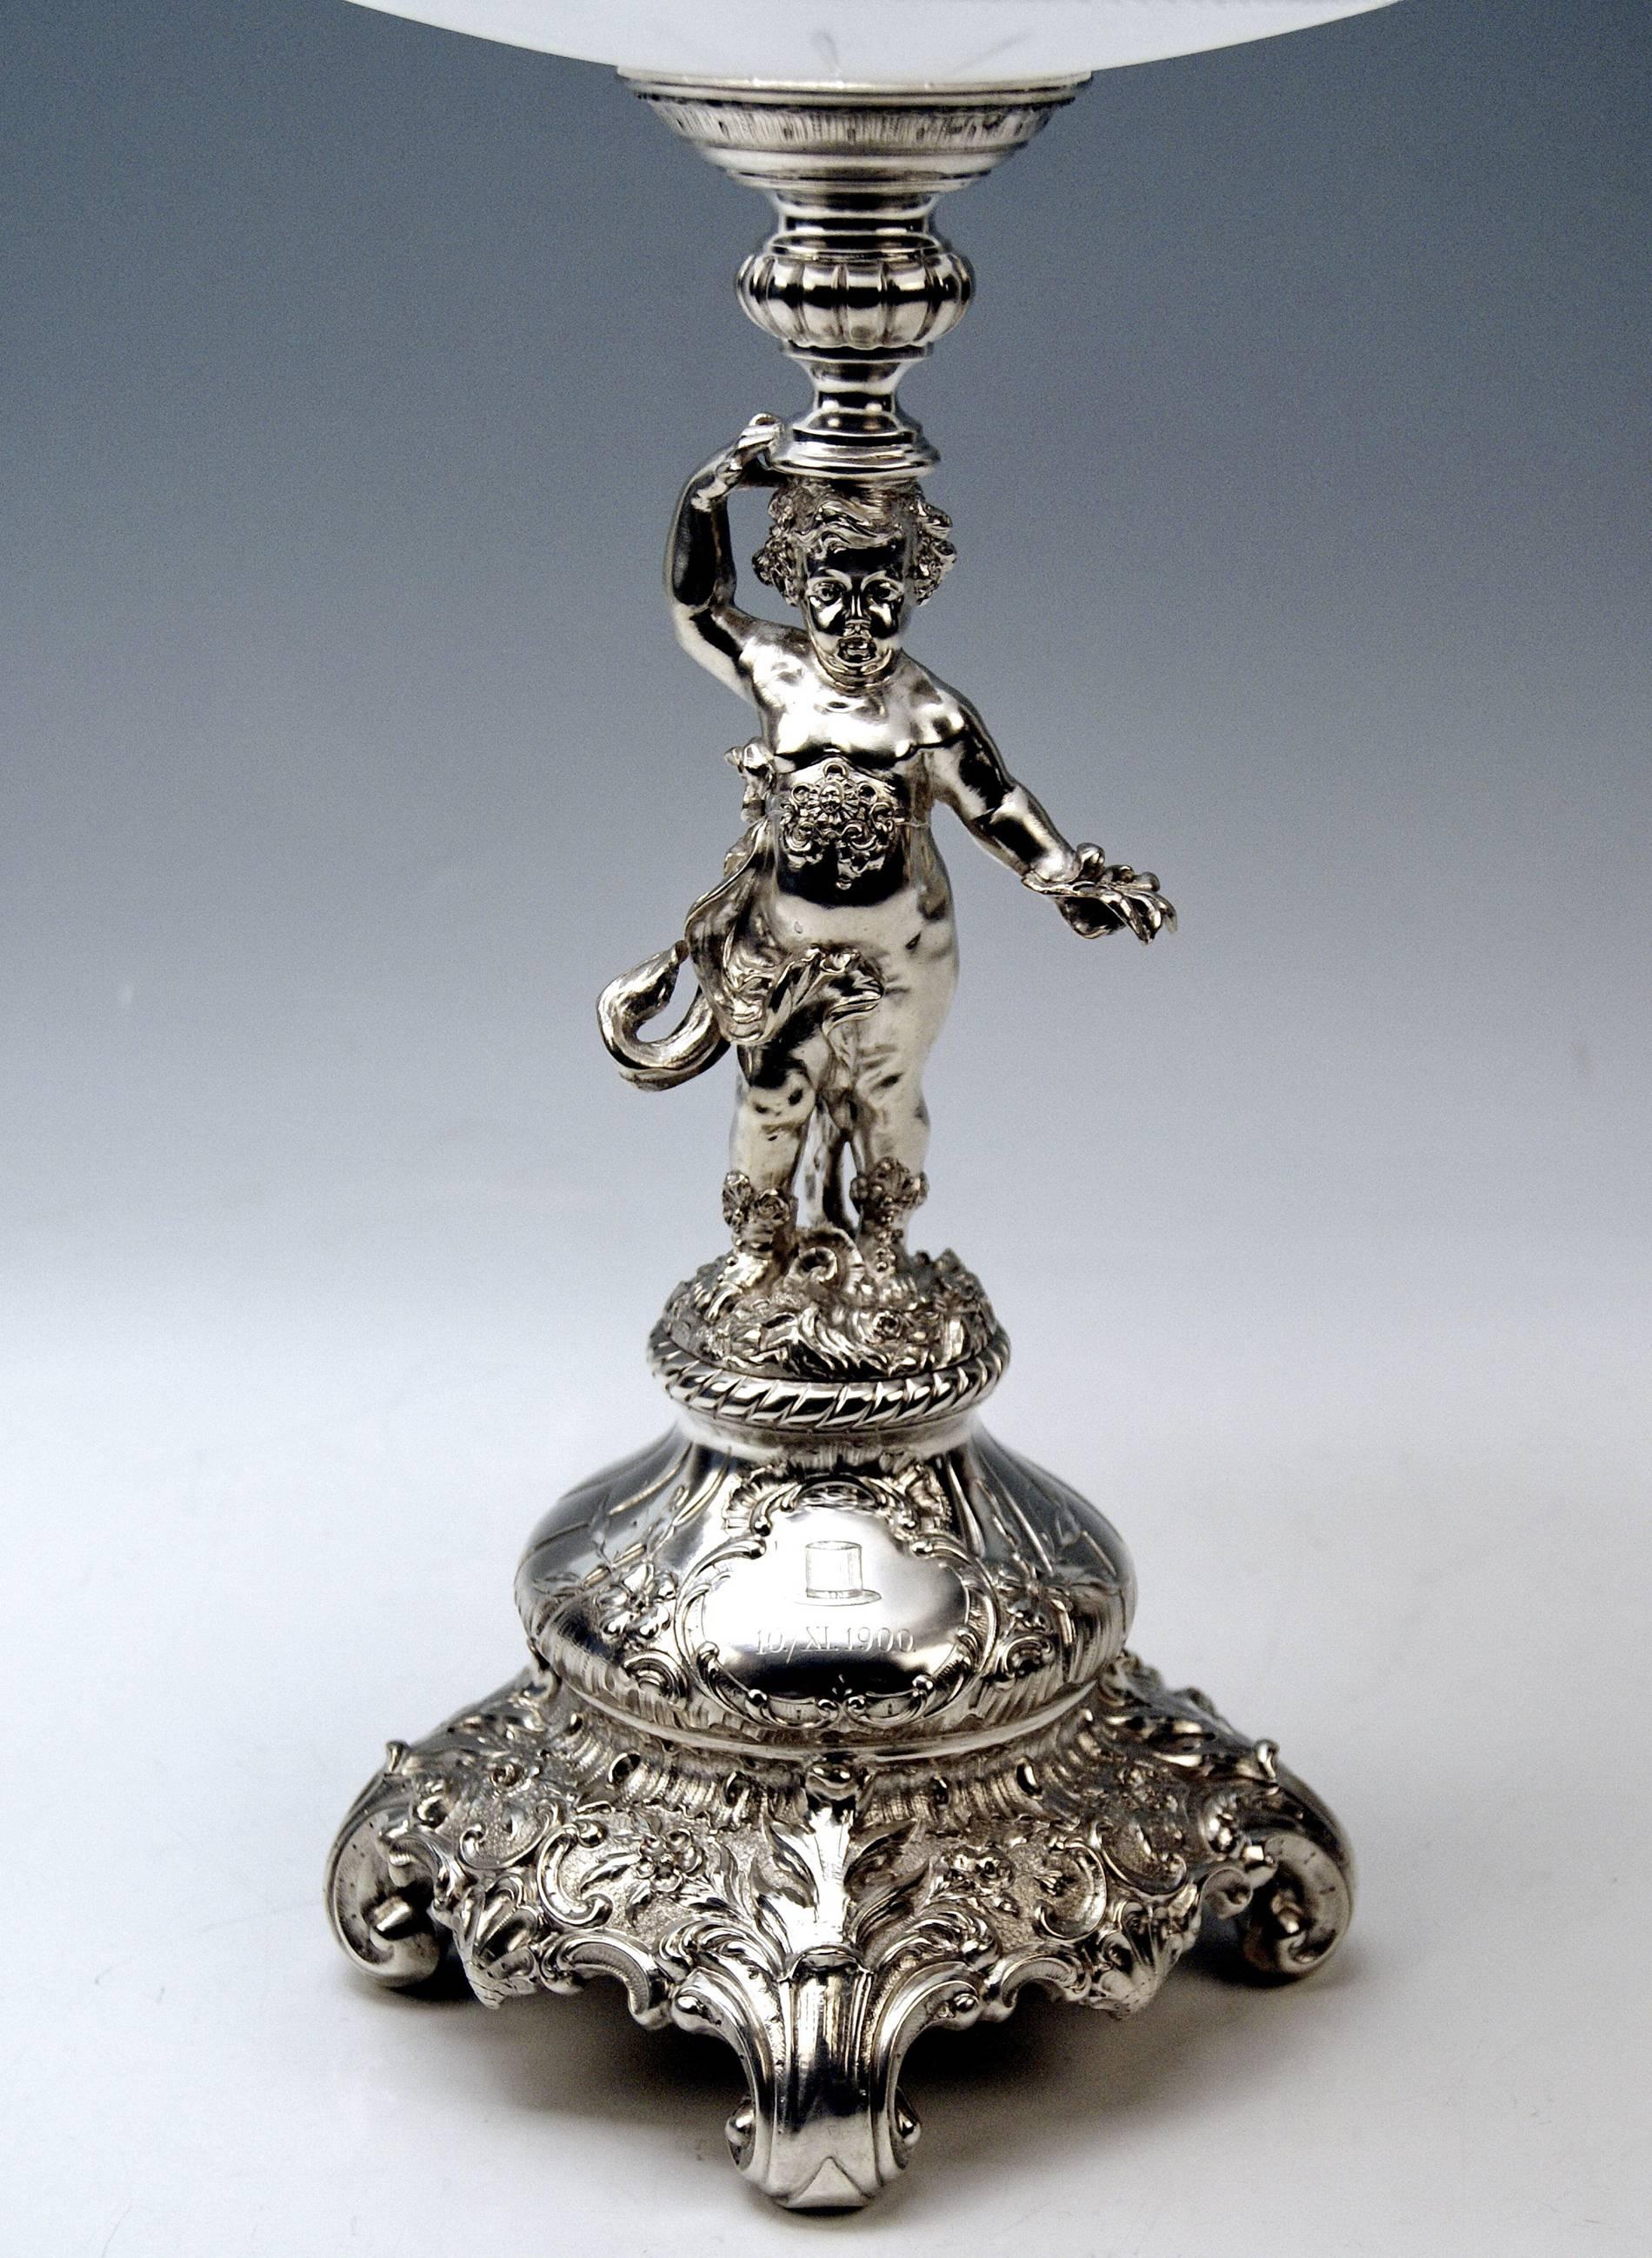 Early 20th Century Silver Austrian Centrepiece with Cherub and Round Glass Platter Dated 11-10-1900